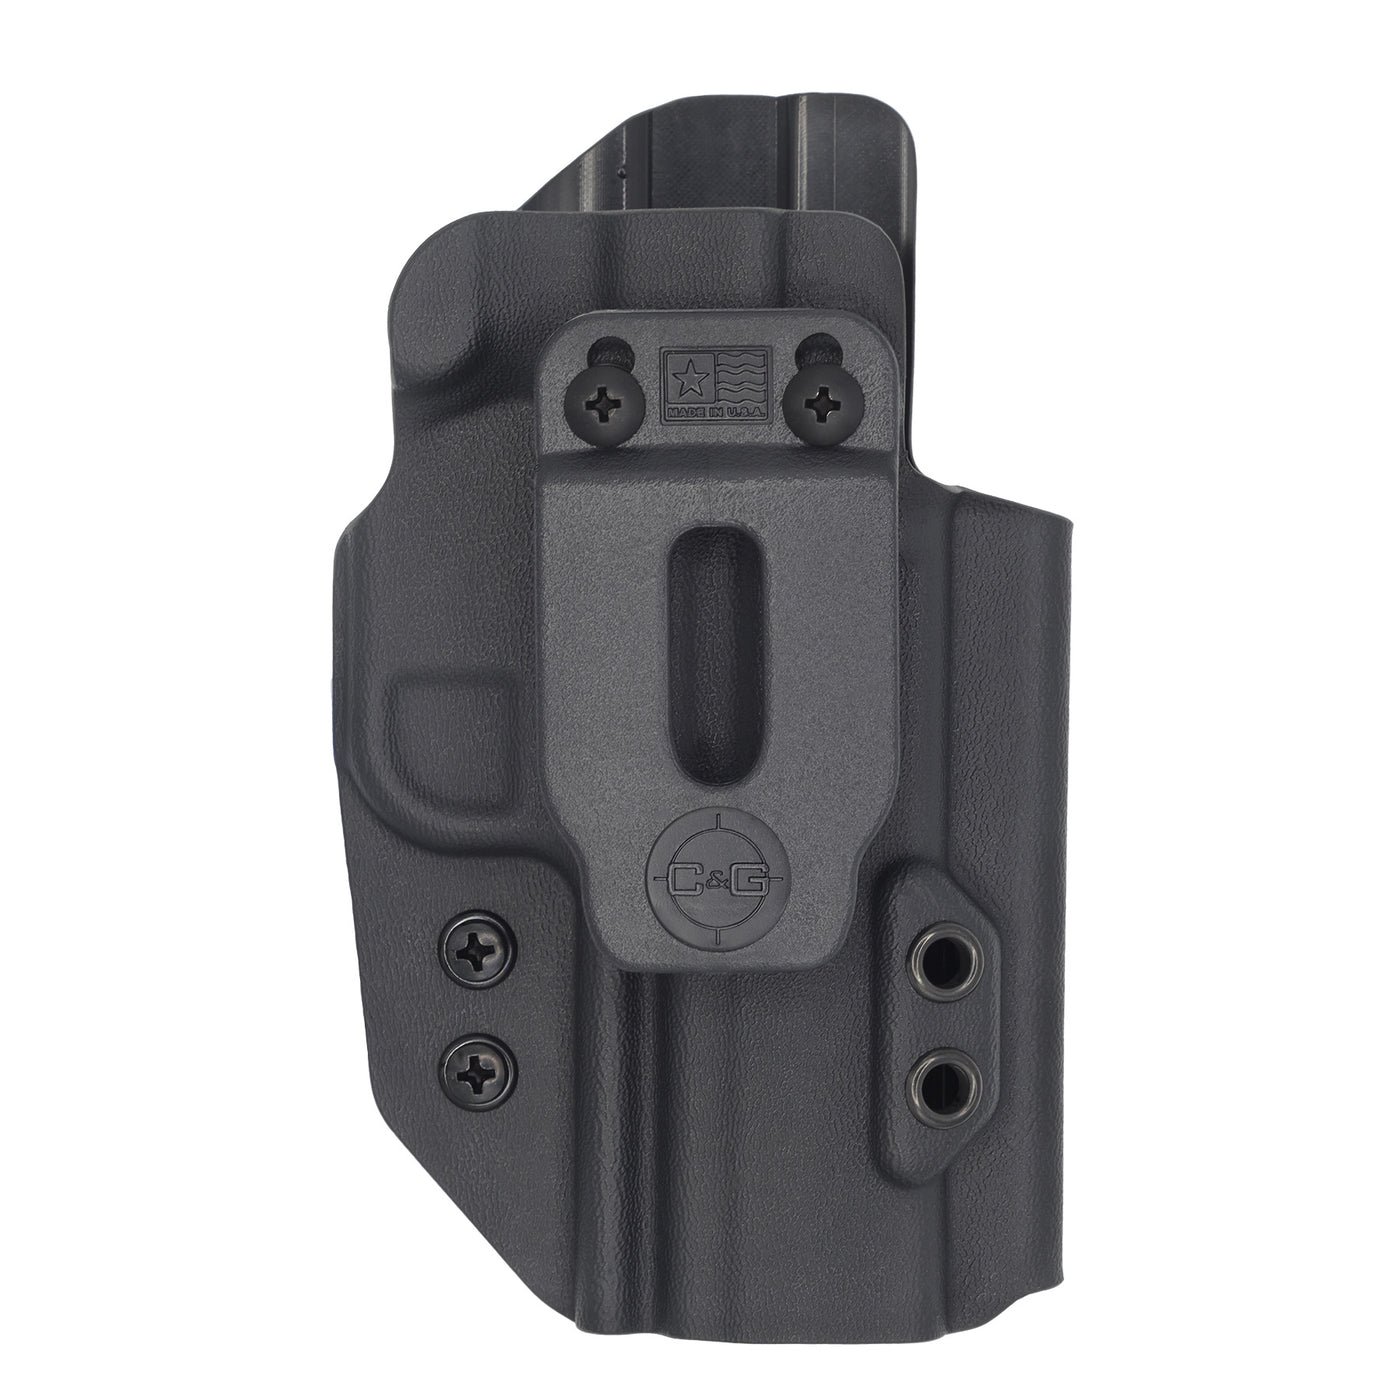 FN 509/t Tactical IWB holster. This is made my C and G Holsters out of Kydex.